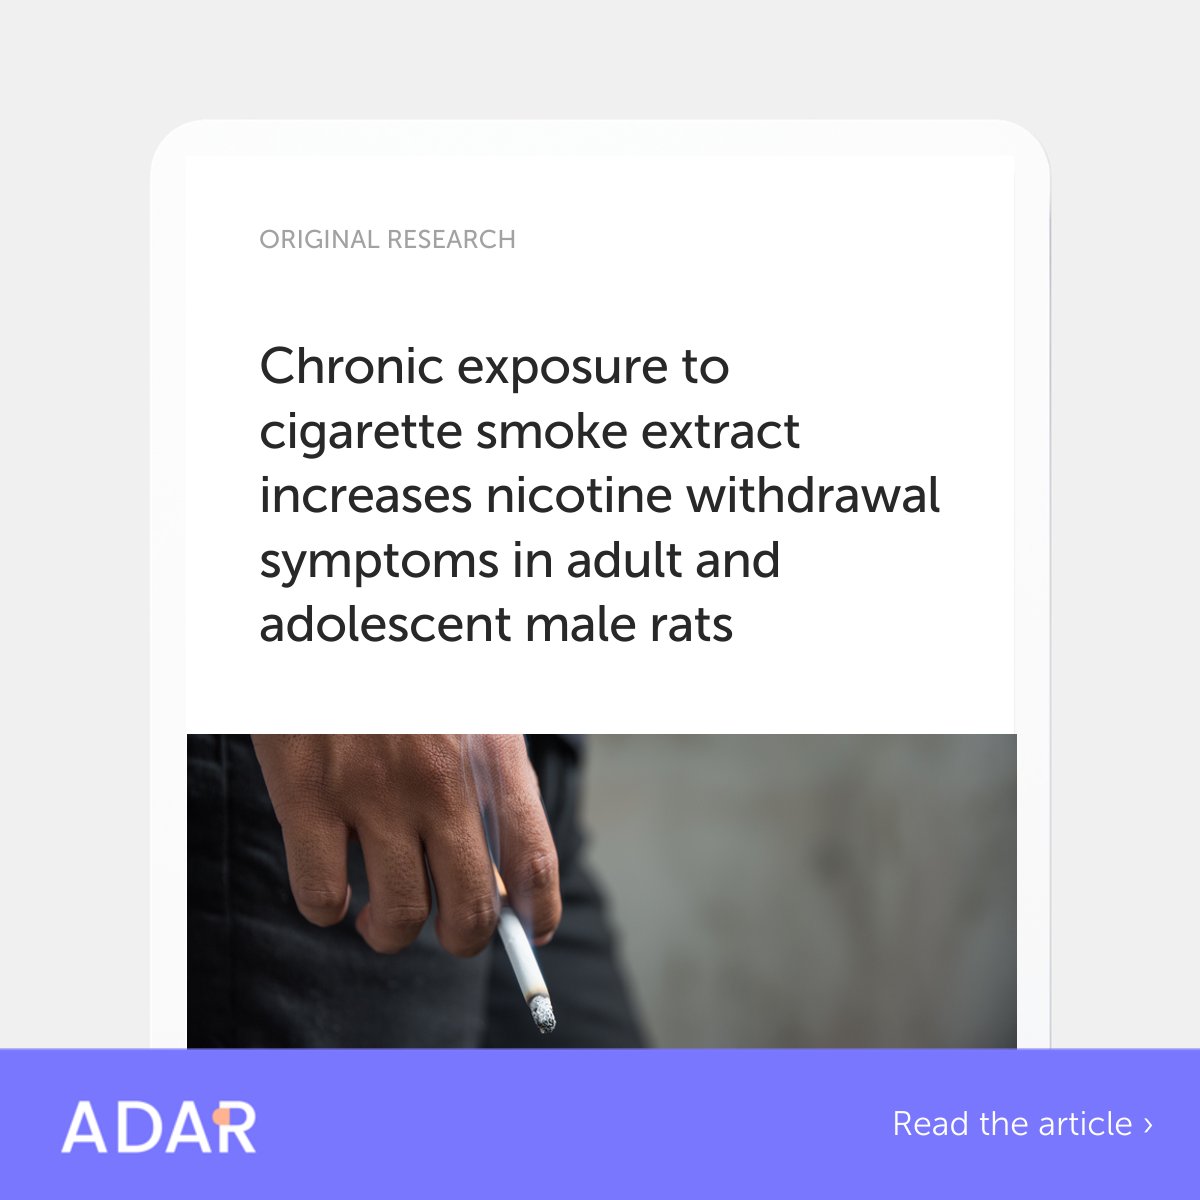 Article spotlight! 💡 New research on the effects of cigarette smoke suggests that it's not just nicotine that contributes to tobacco dependence. Find out more in the article published by @INRCmeeting and IDARS' journal ADAR here 👉fro.ntiers.in/nictotine